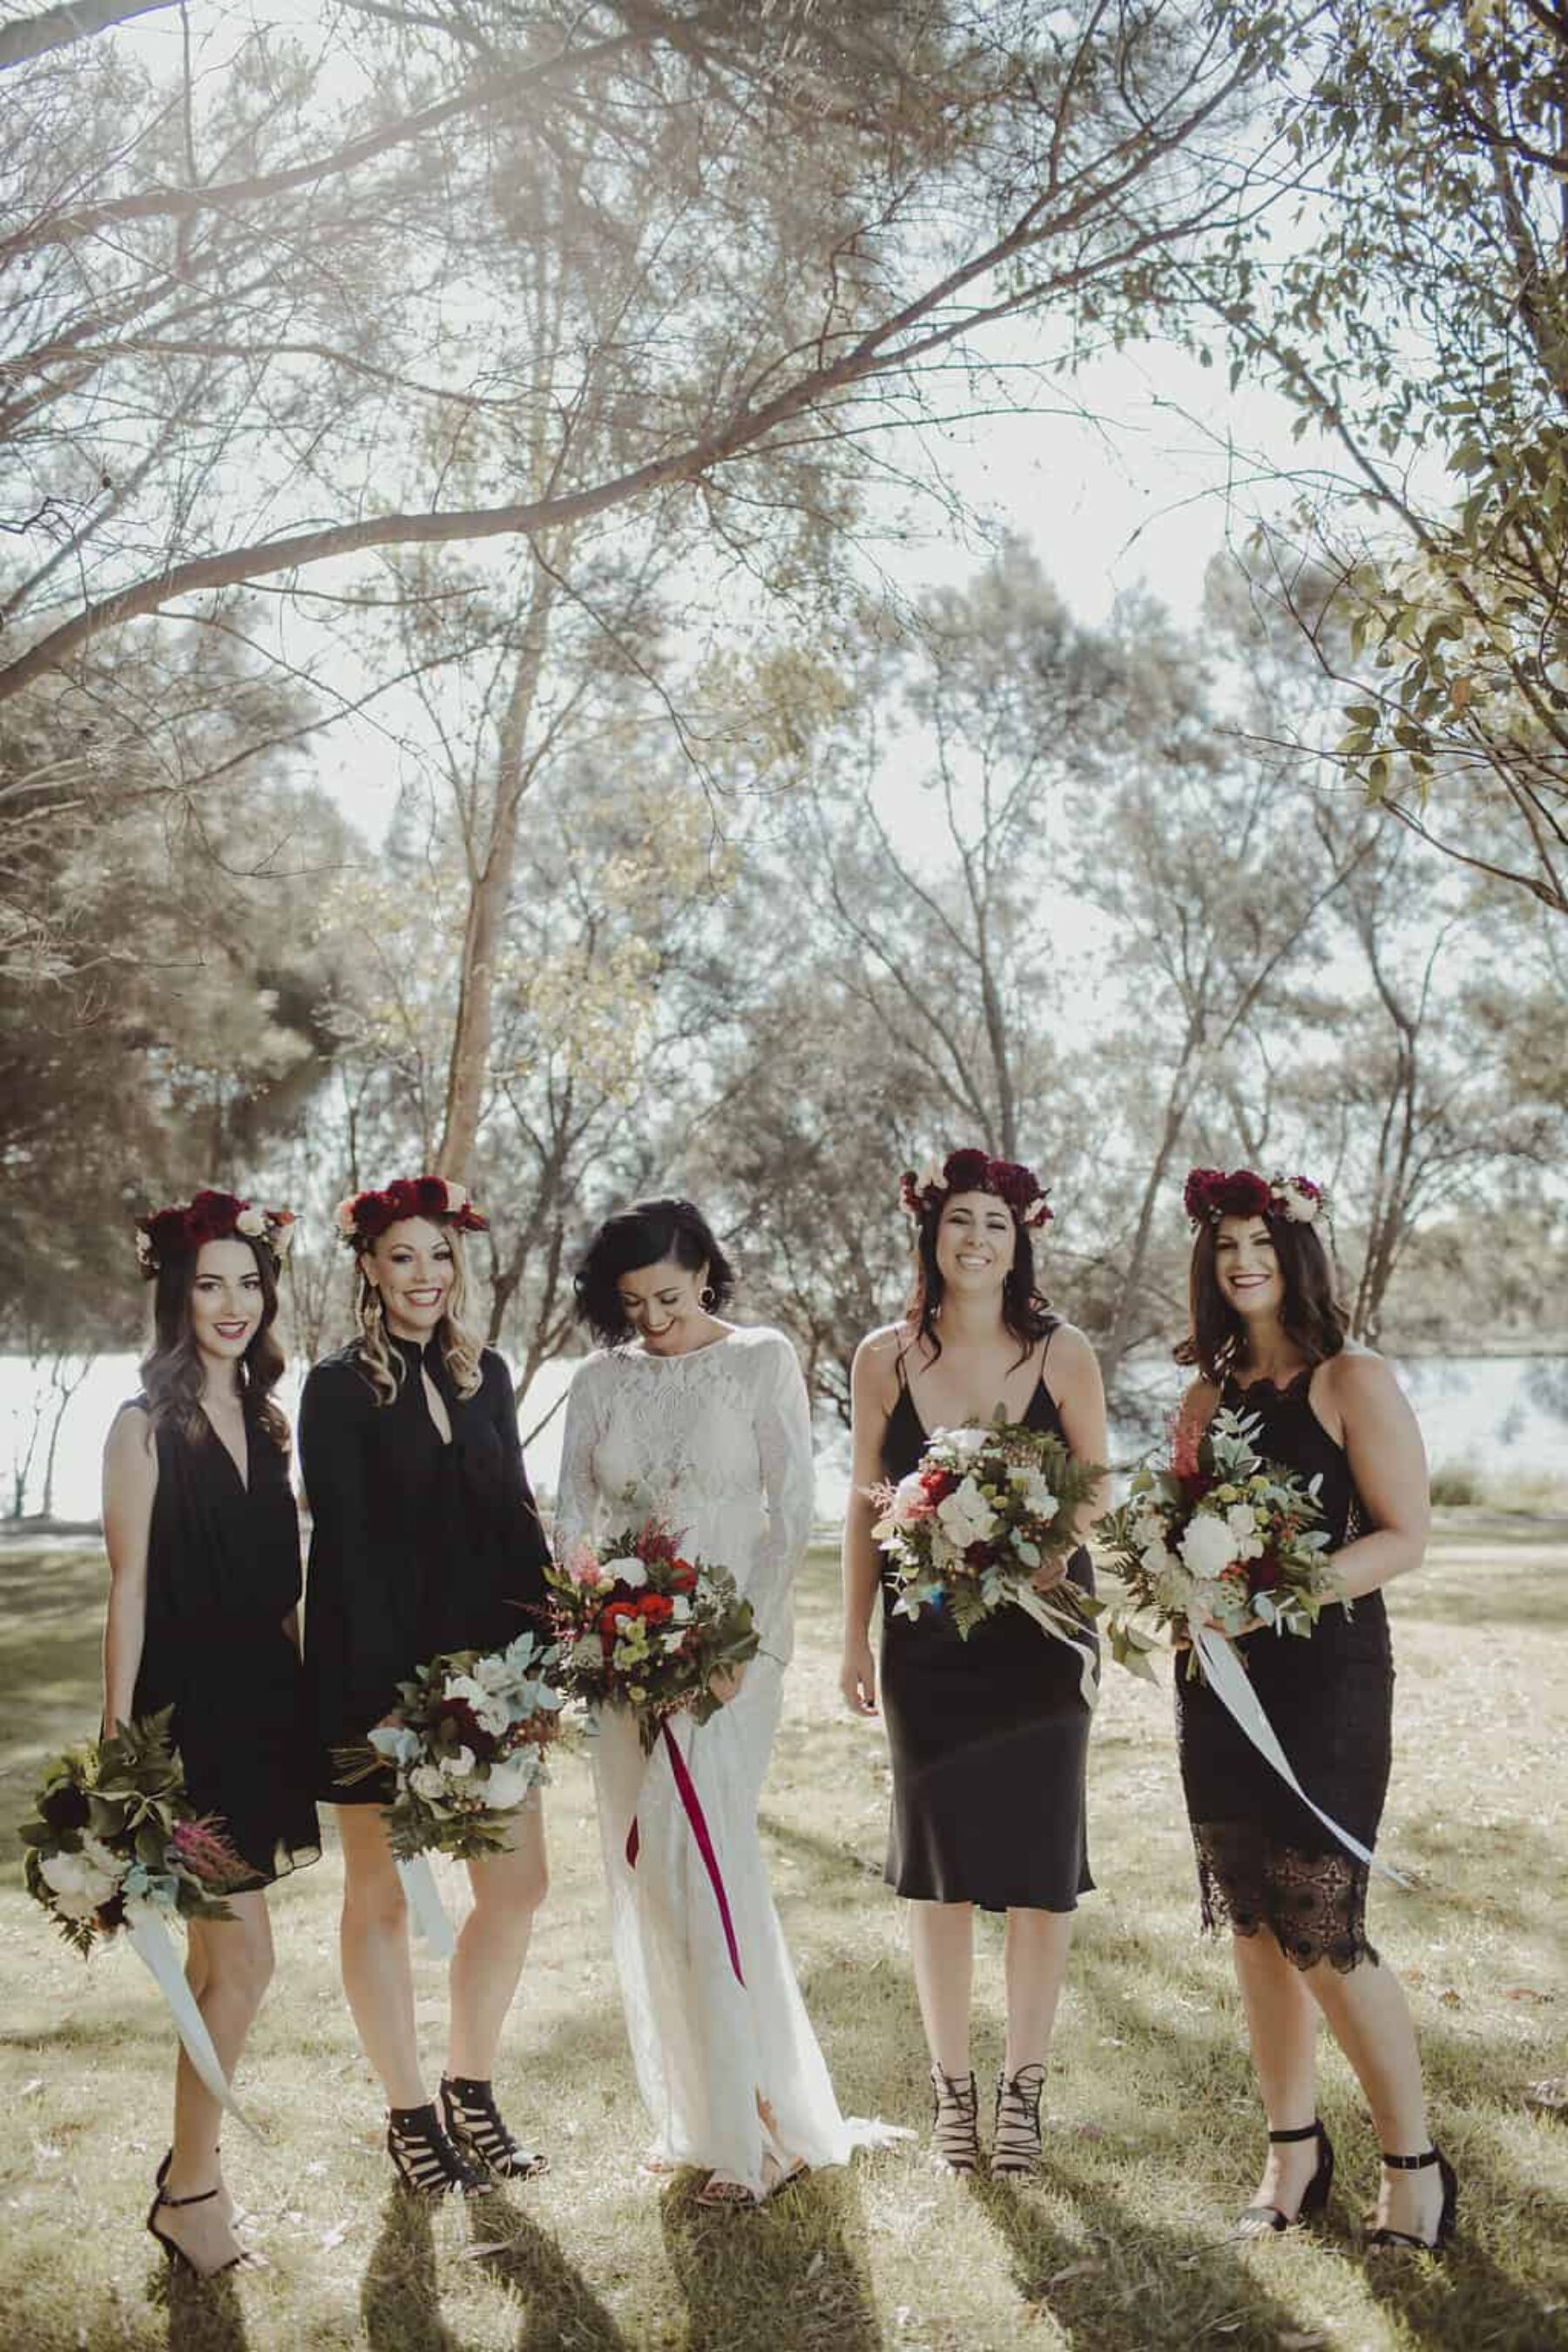 bridesmaids in black dresses and flower crowns